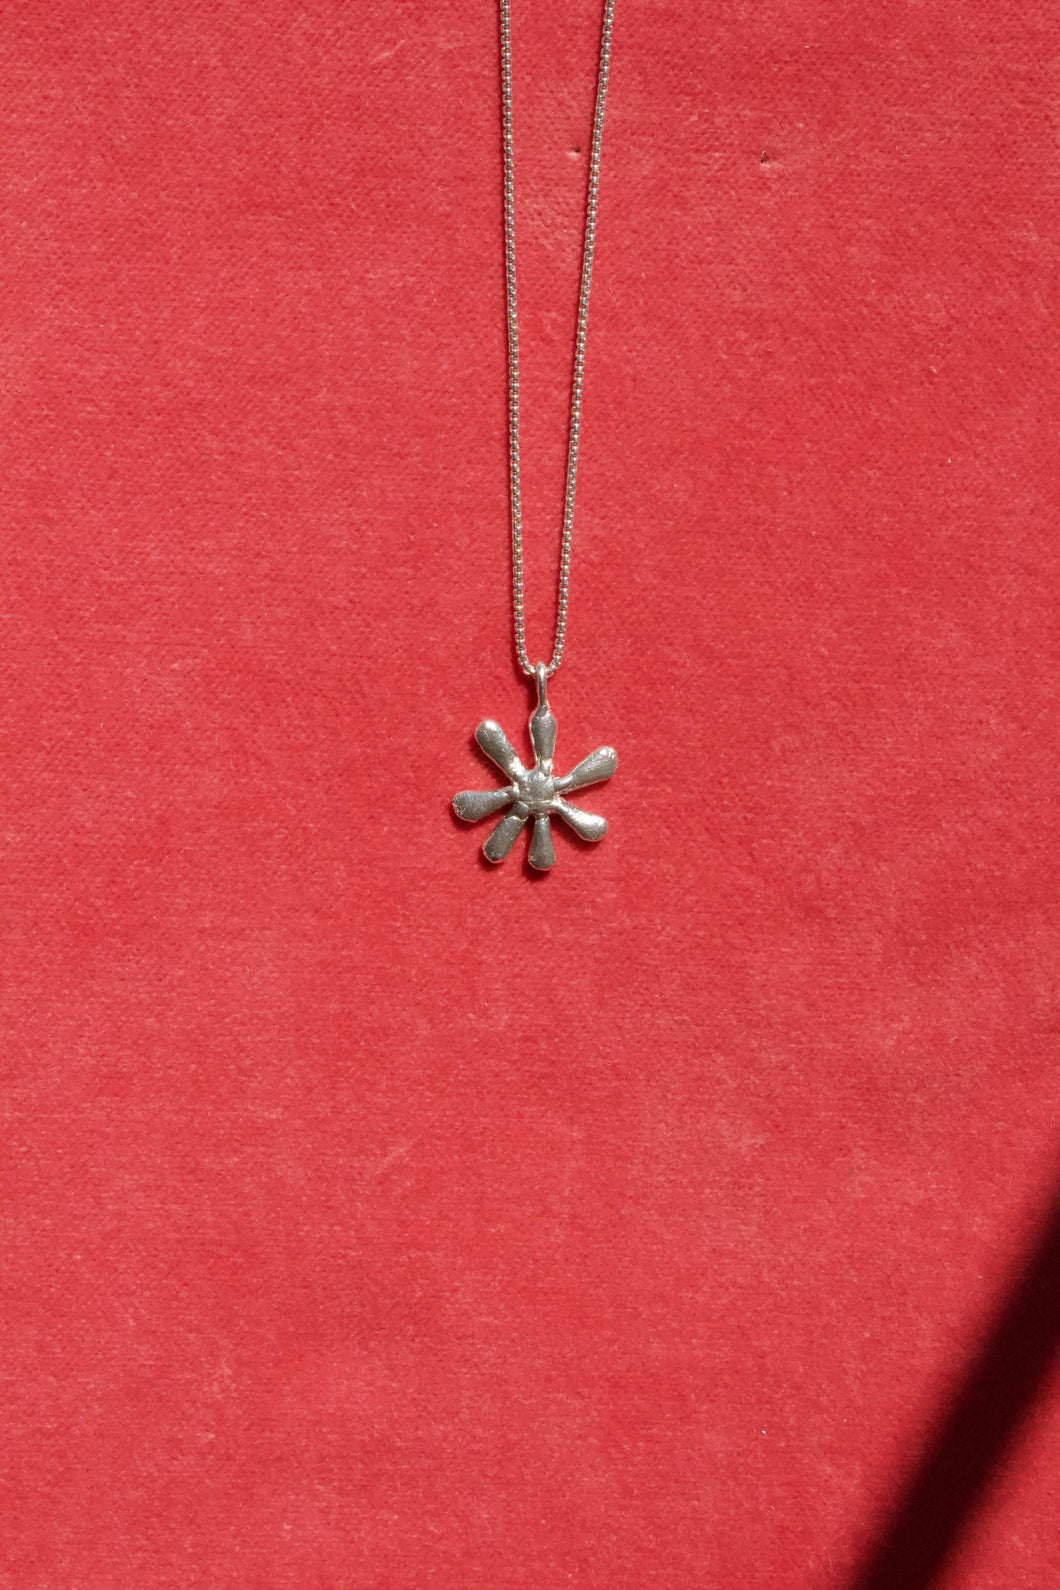 Daisy pendant necklace from Erica Leal. This necklace has a delicate thin chain, and a abstract 7-petal daisy pendant charm as the focal point. all parts of this necklace are sterling silver, and is handmade from start to finish in Vancouver, BC. 